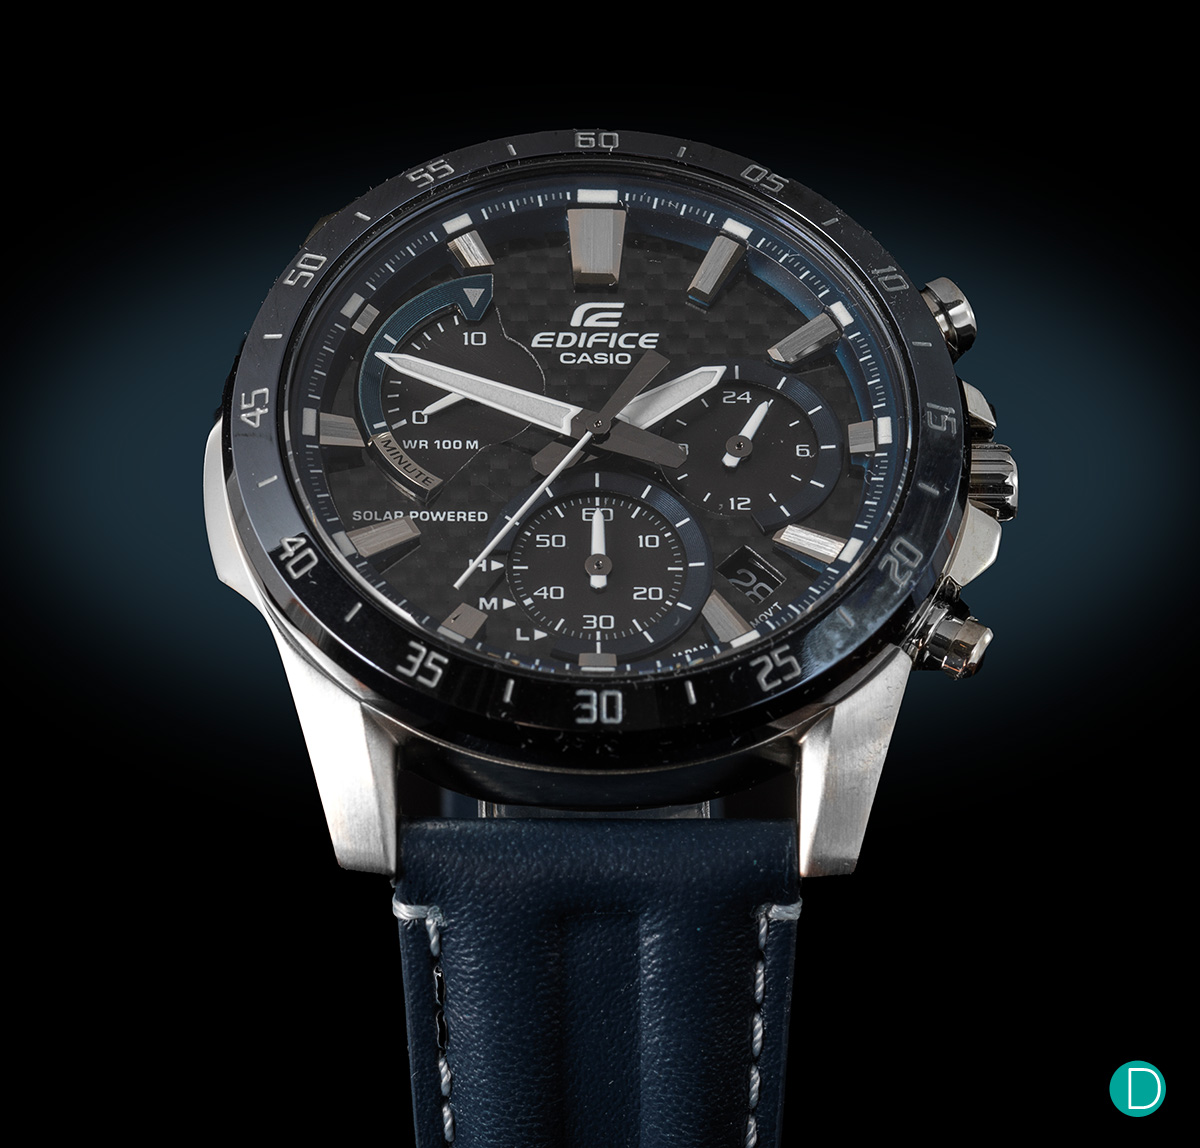 Geleend Alabama toren Review: hands-on with the new Casio Edifice EQS-930BL-2AVUDF -